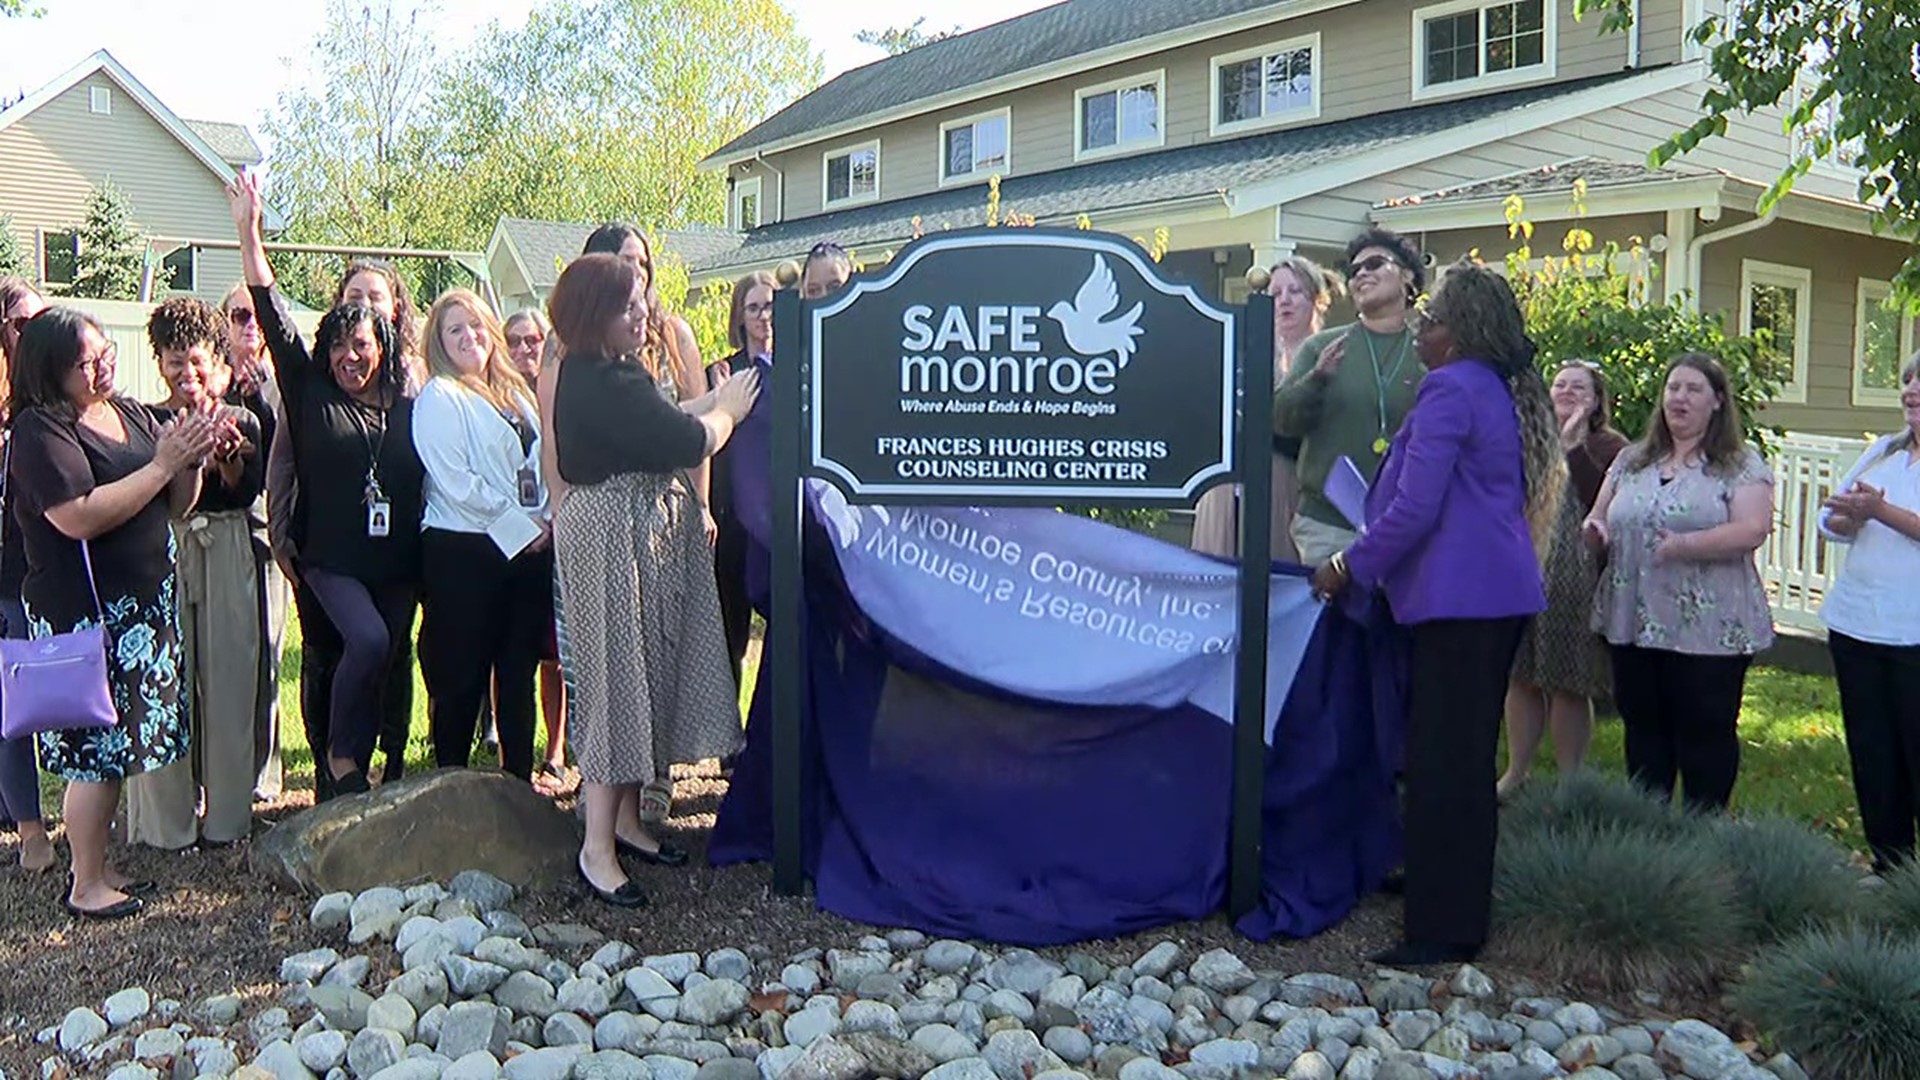 Women's Resources of Monroe County debuted their new name on Monday, which is more inclusive for everyone they serve.